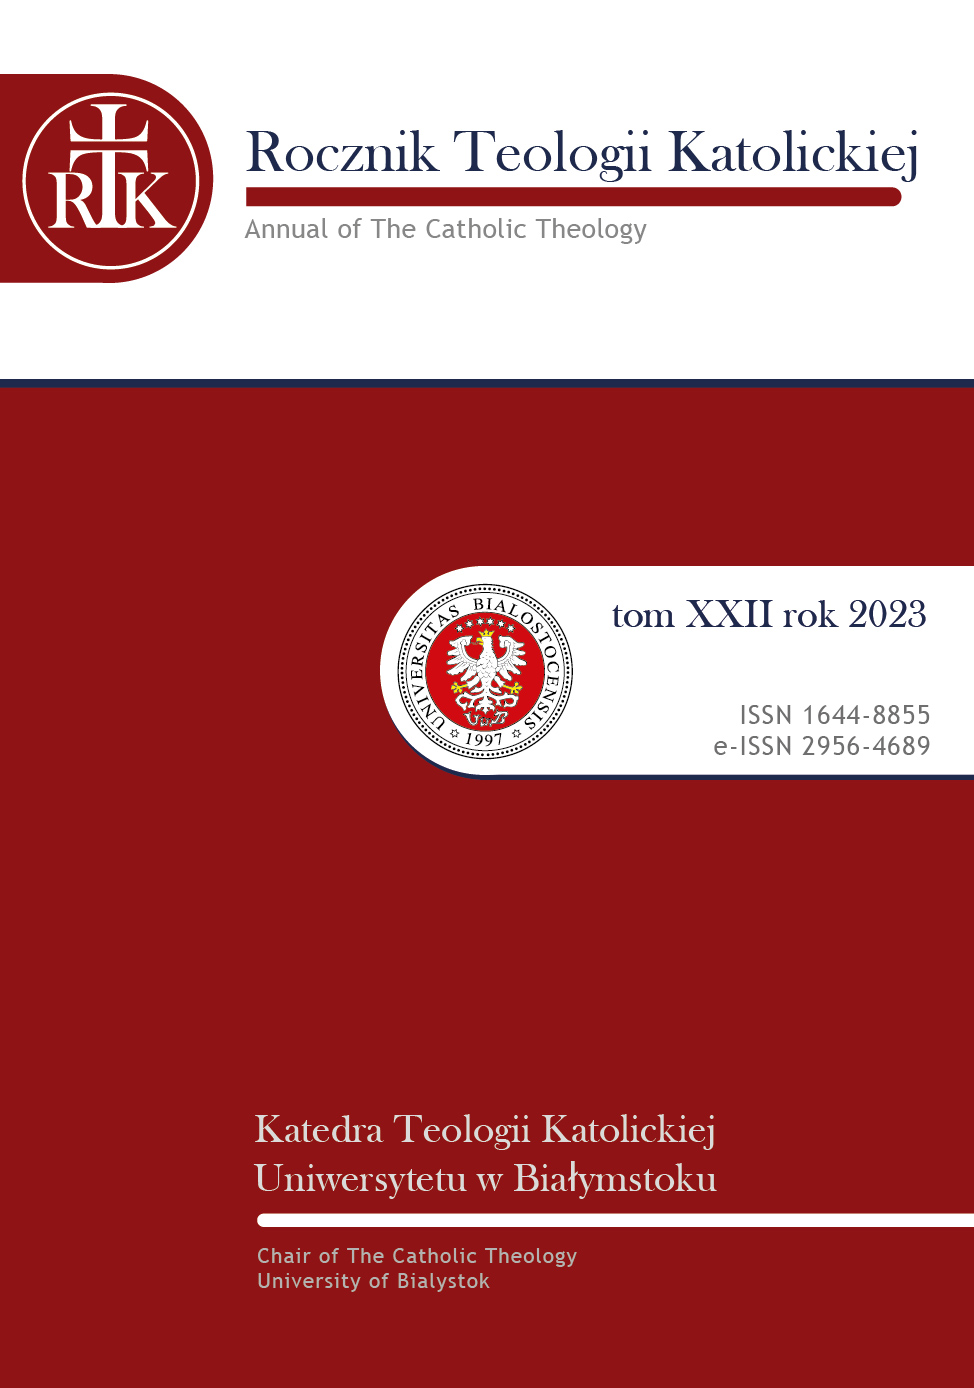 Religiosity and Secularisation of
Polish Youth in the 21st Century.
Quantitative Research Analysis